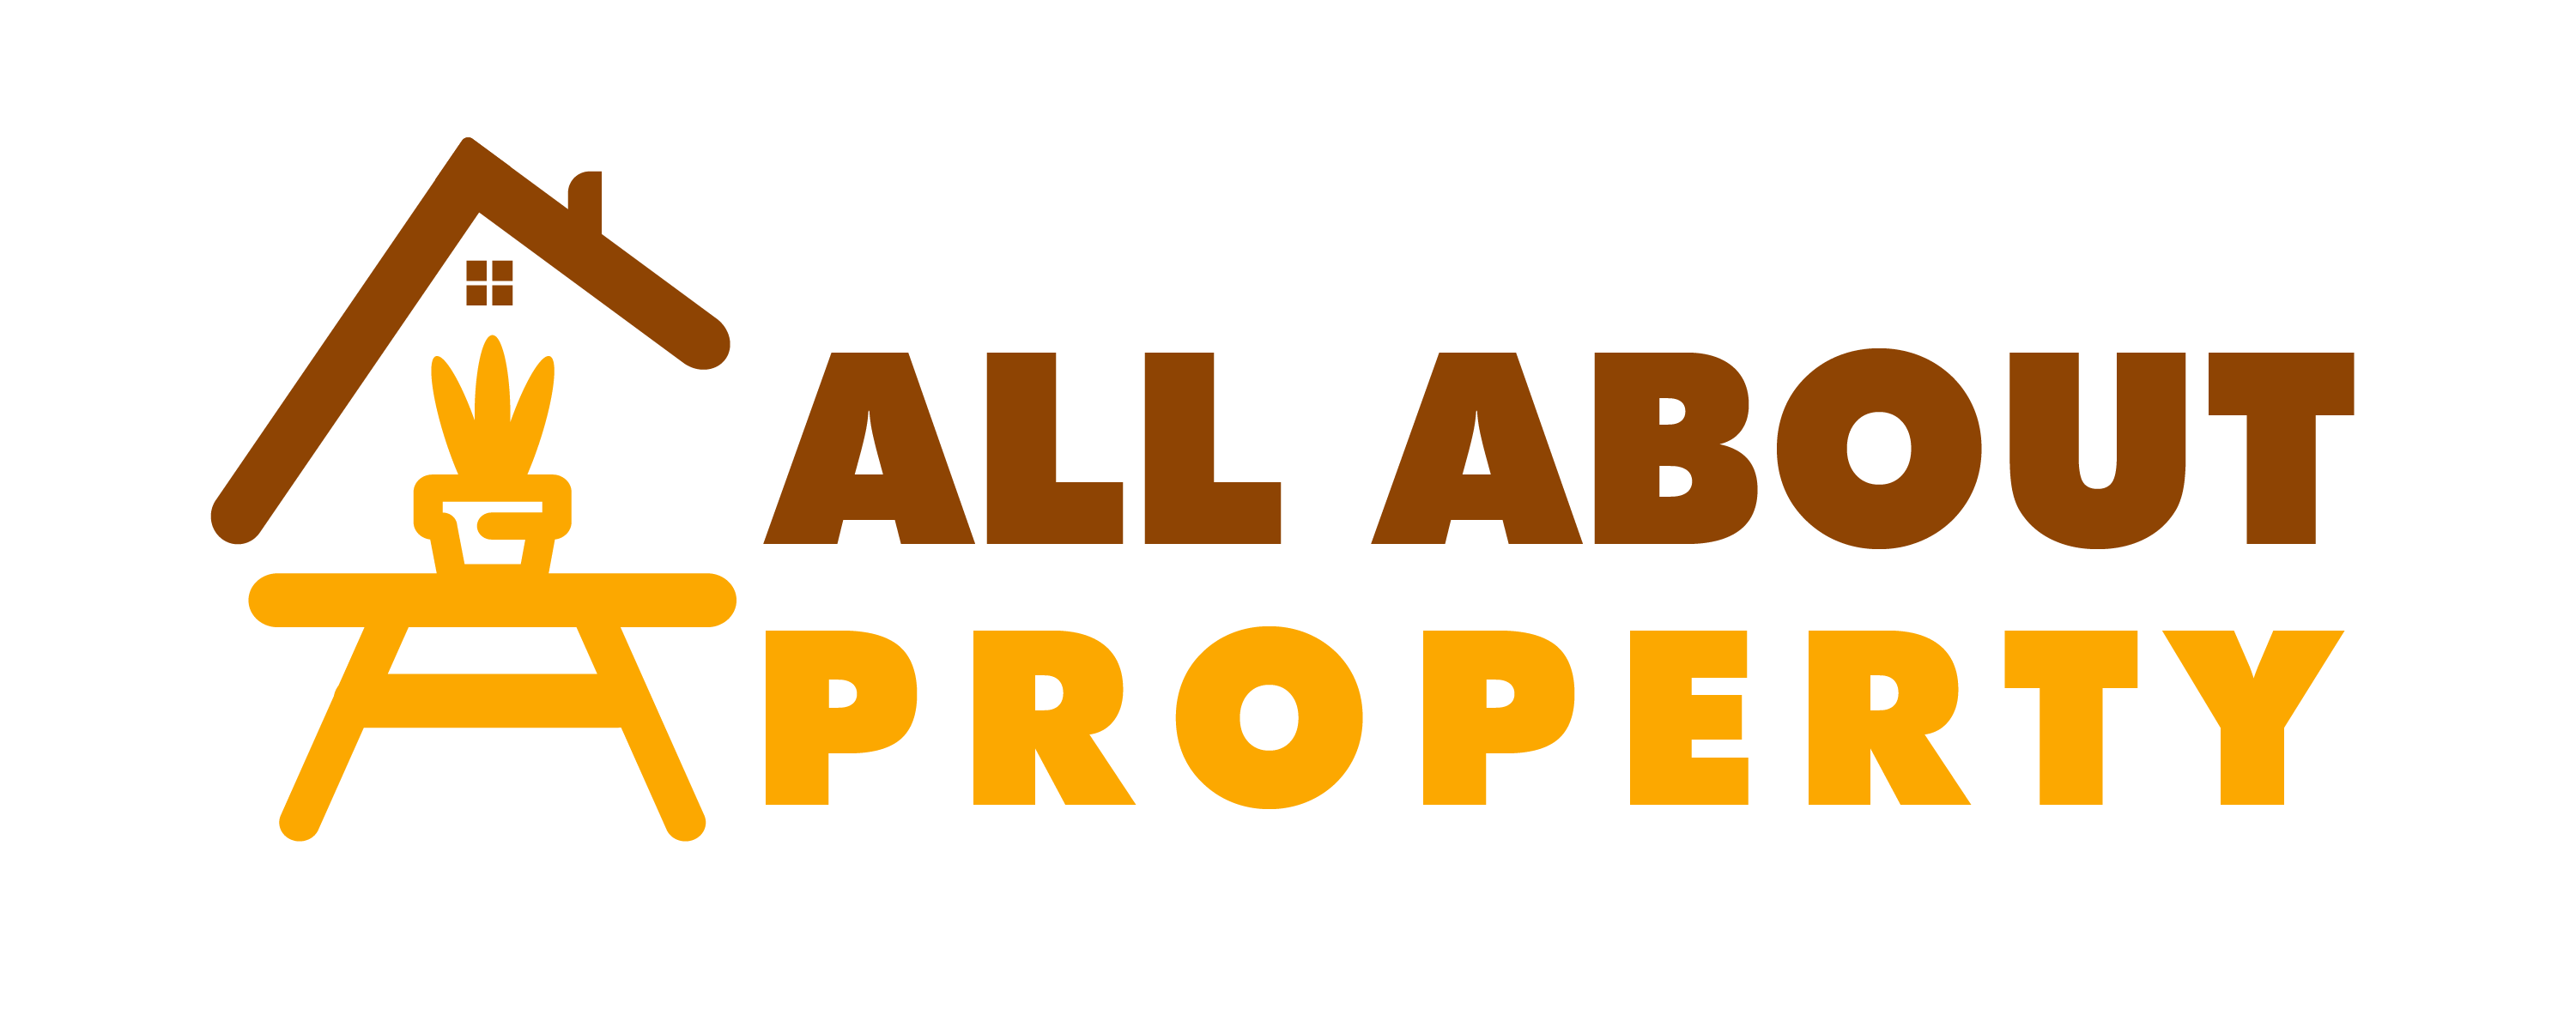 All About Property